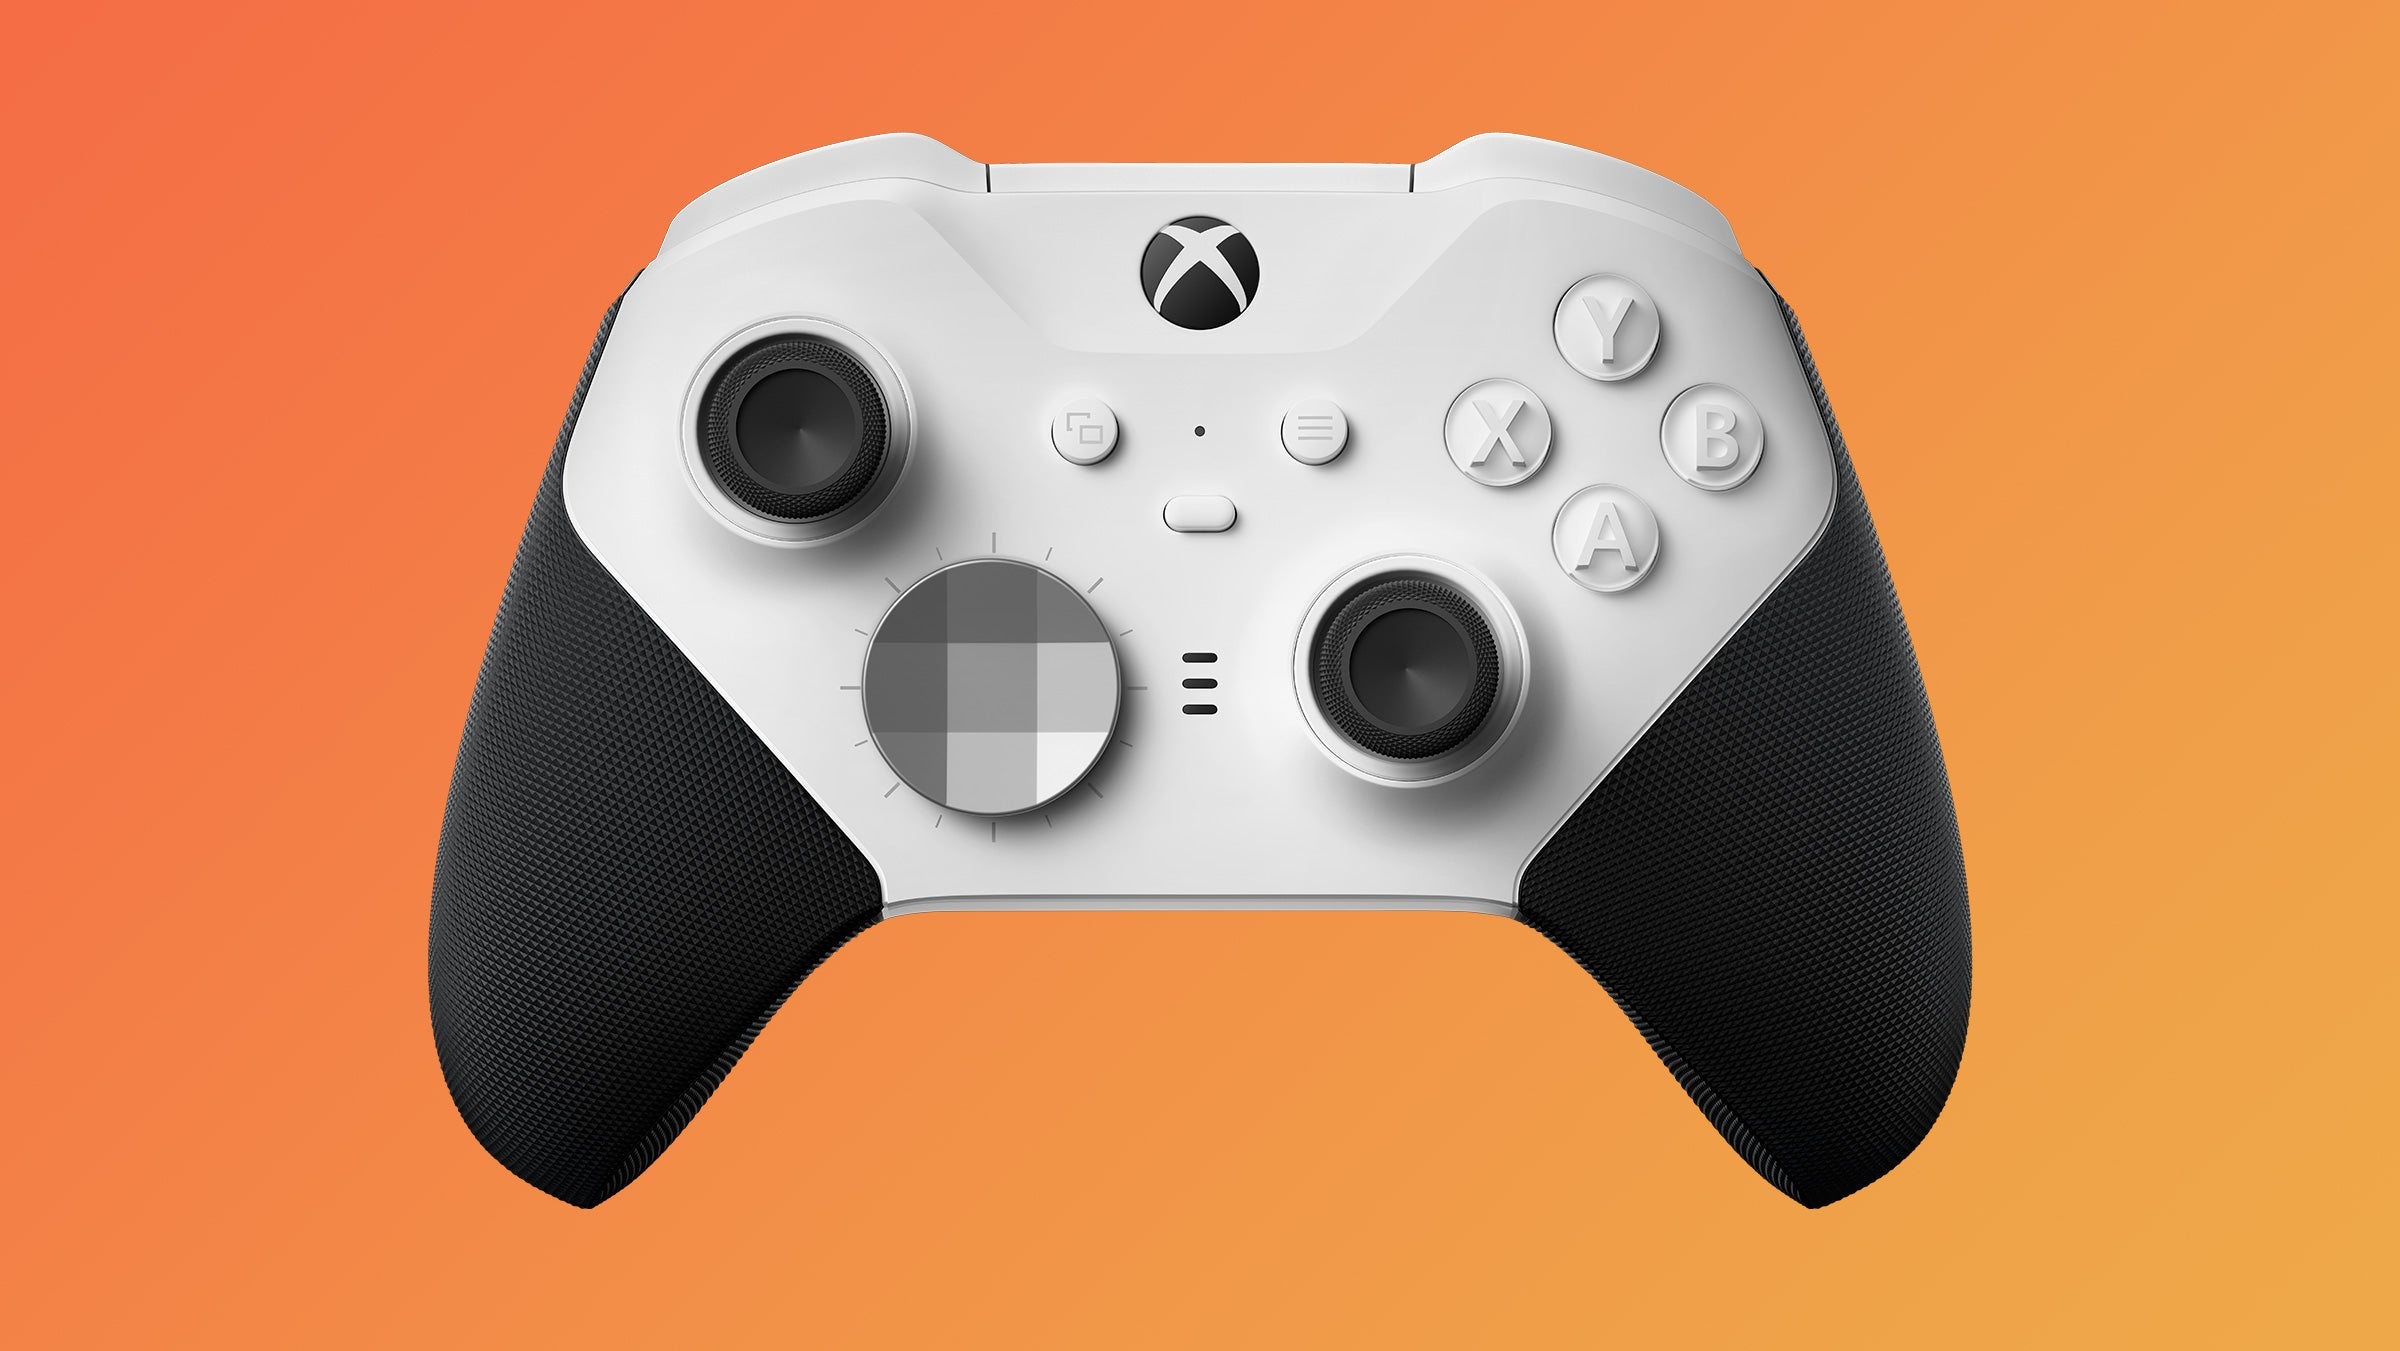 Upgrade to the Xbox Elite Series 2 Core gamepad for $99 | Rock 